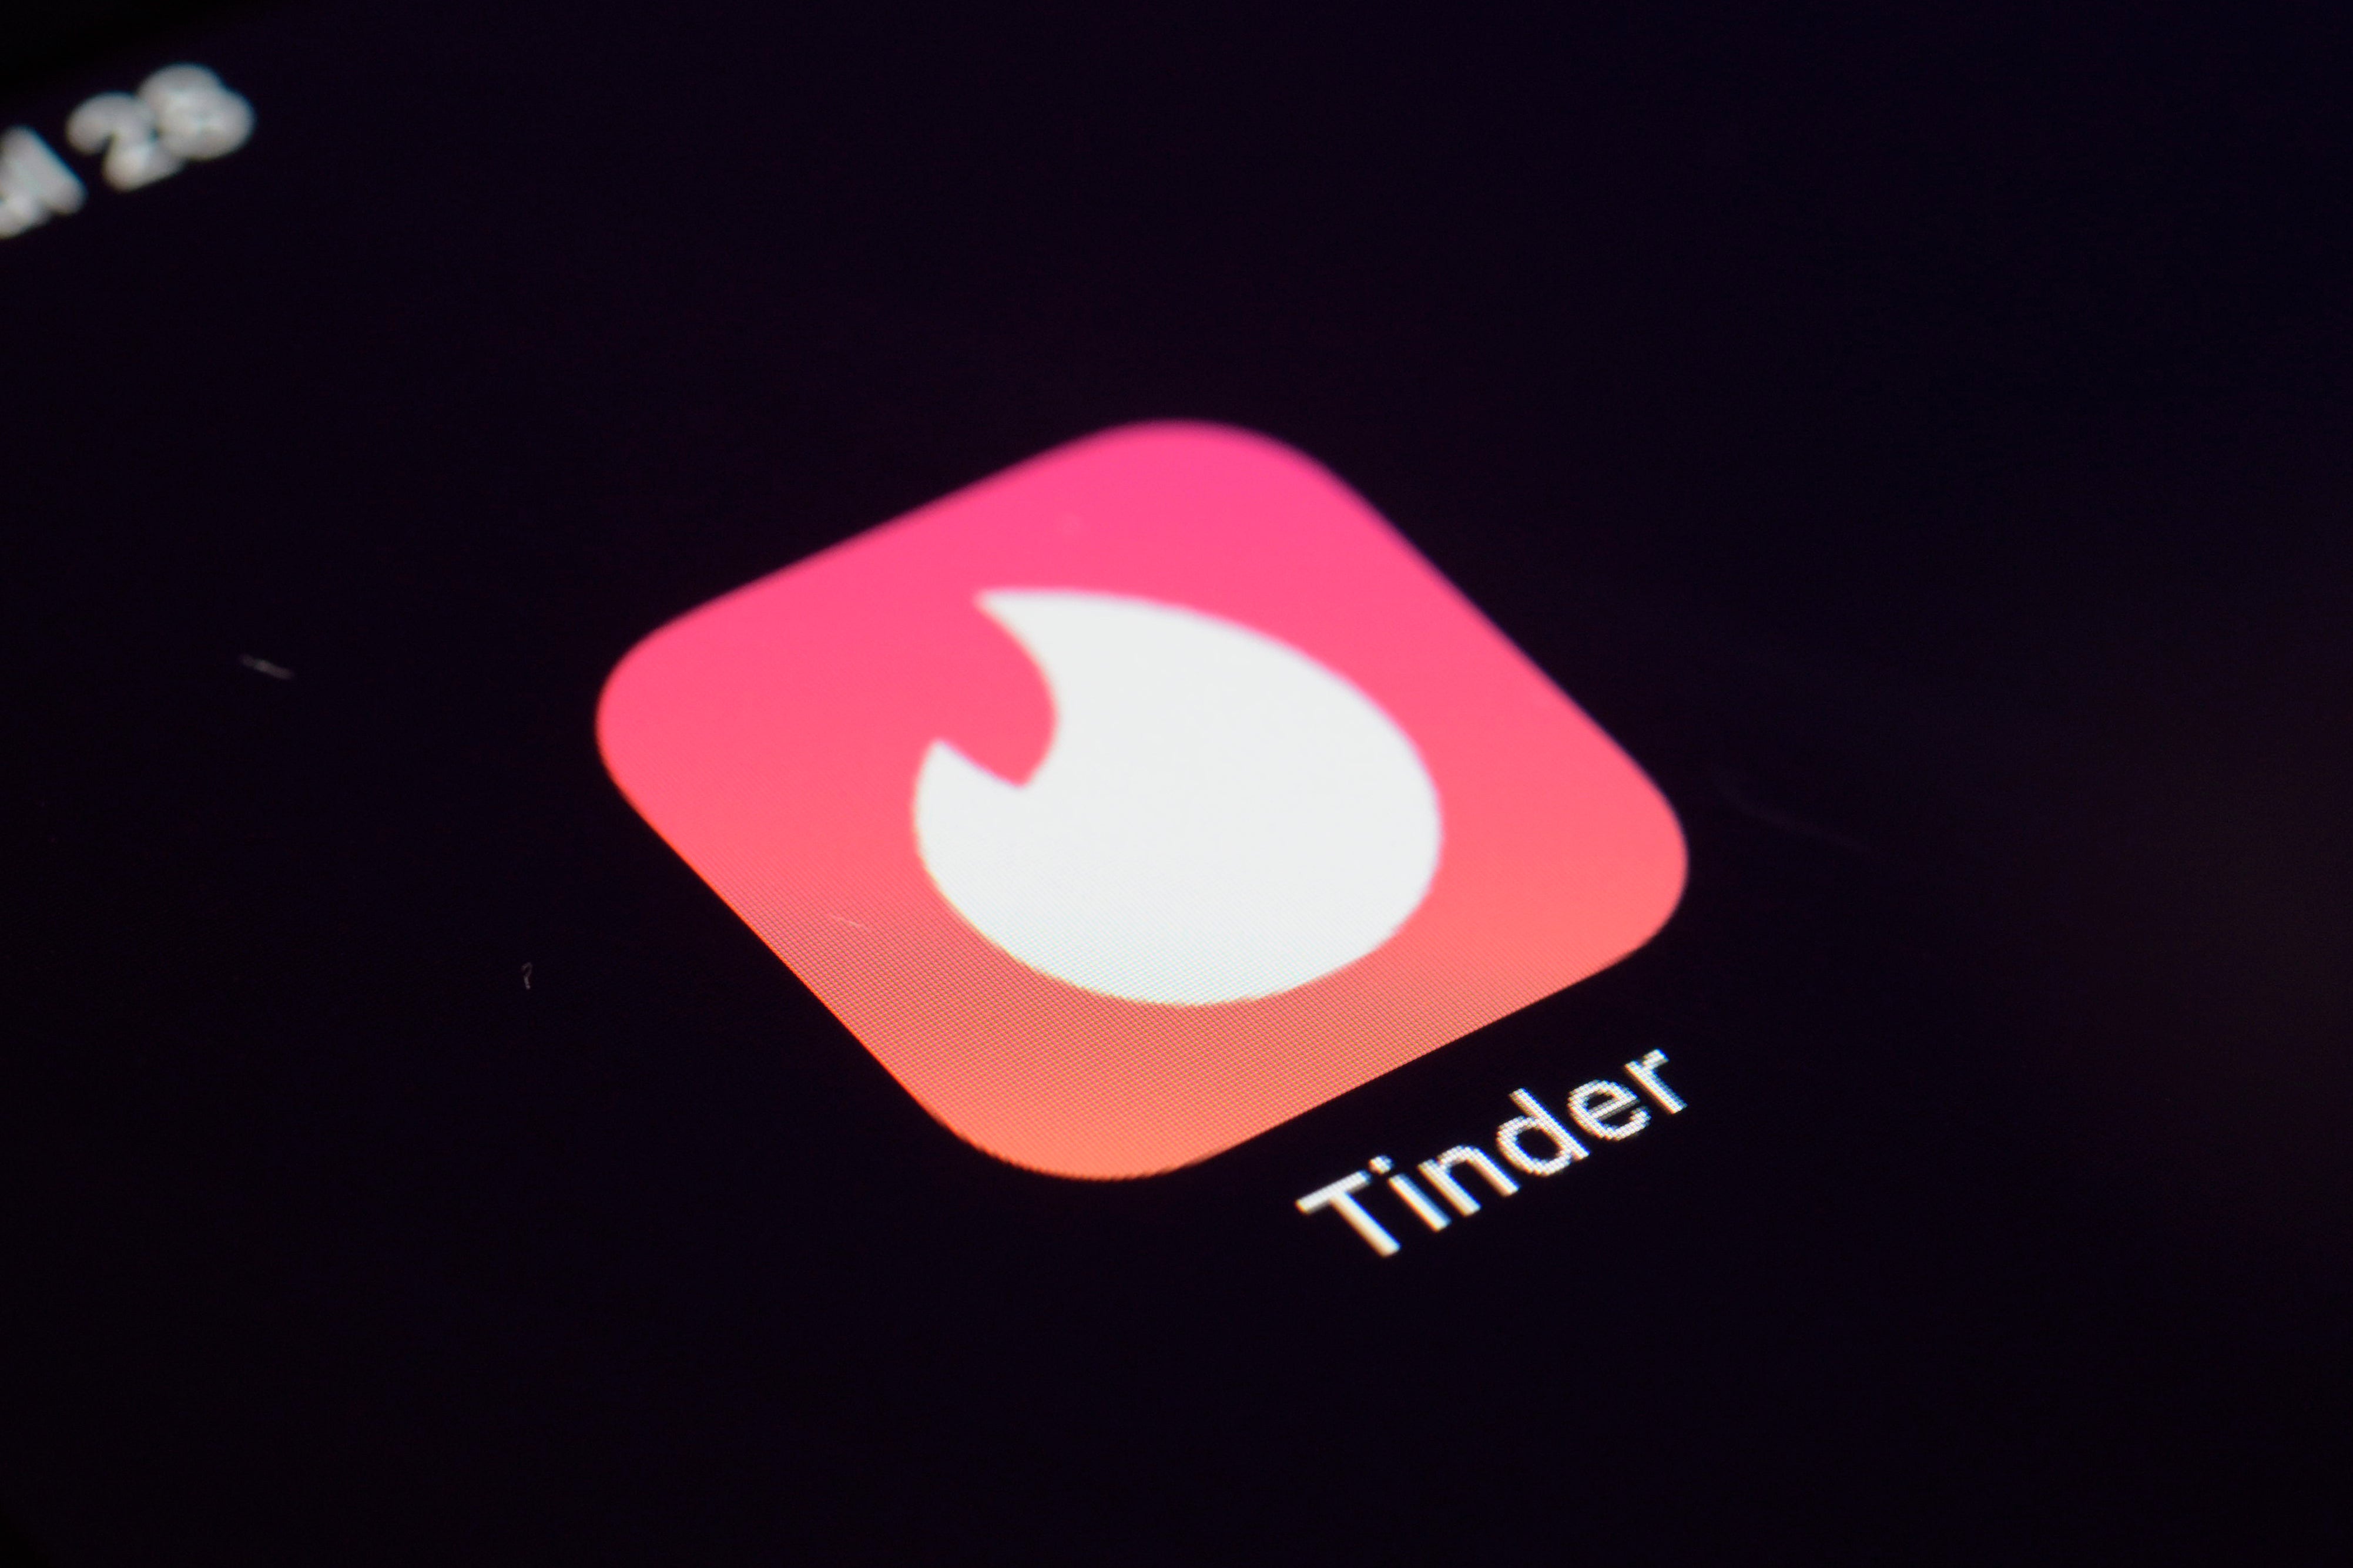 The Tinder app is changing